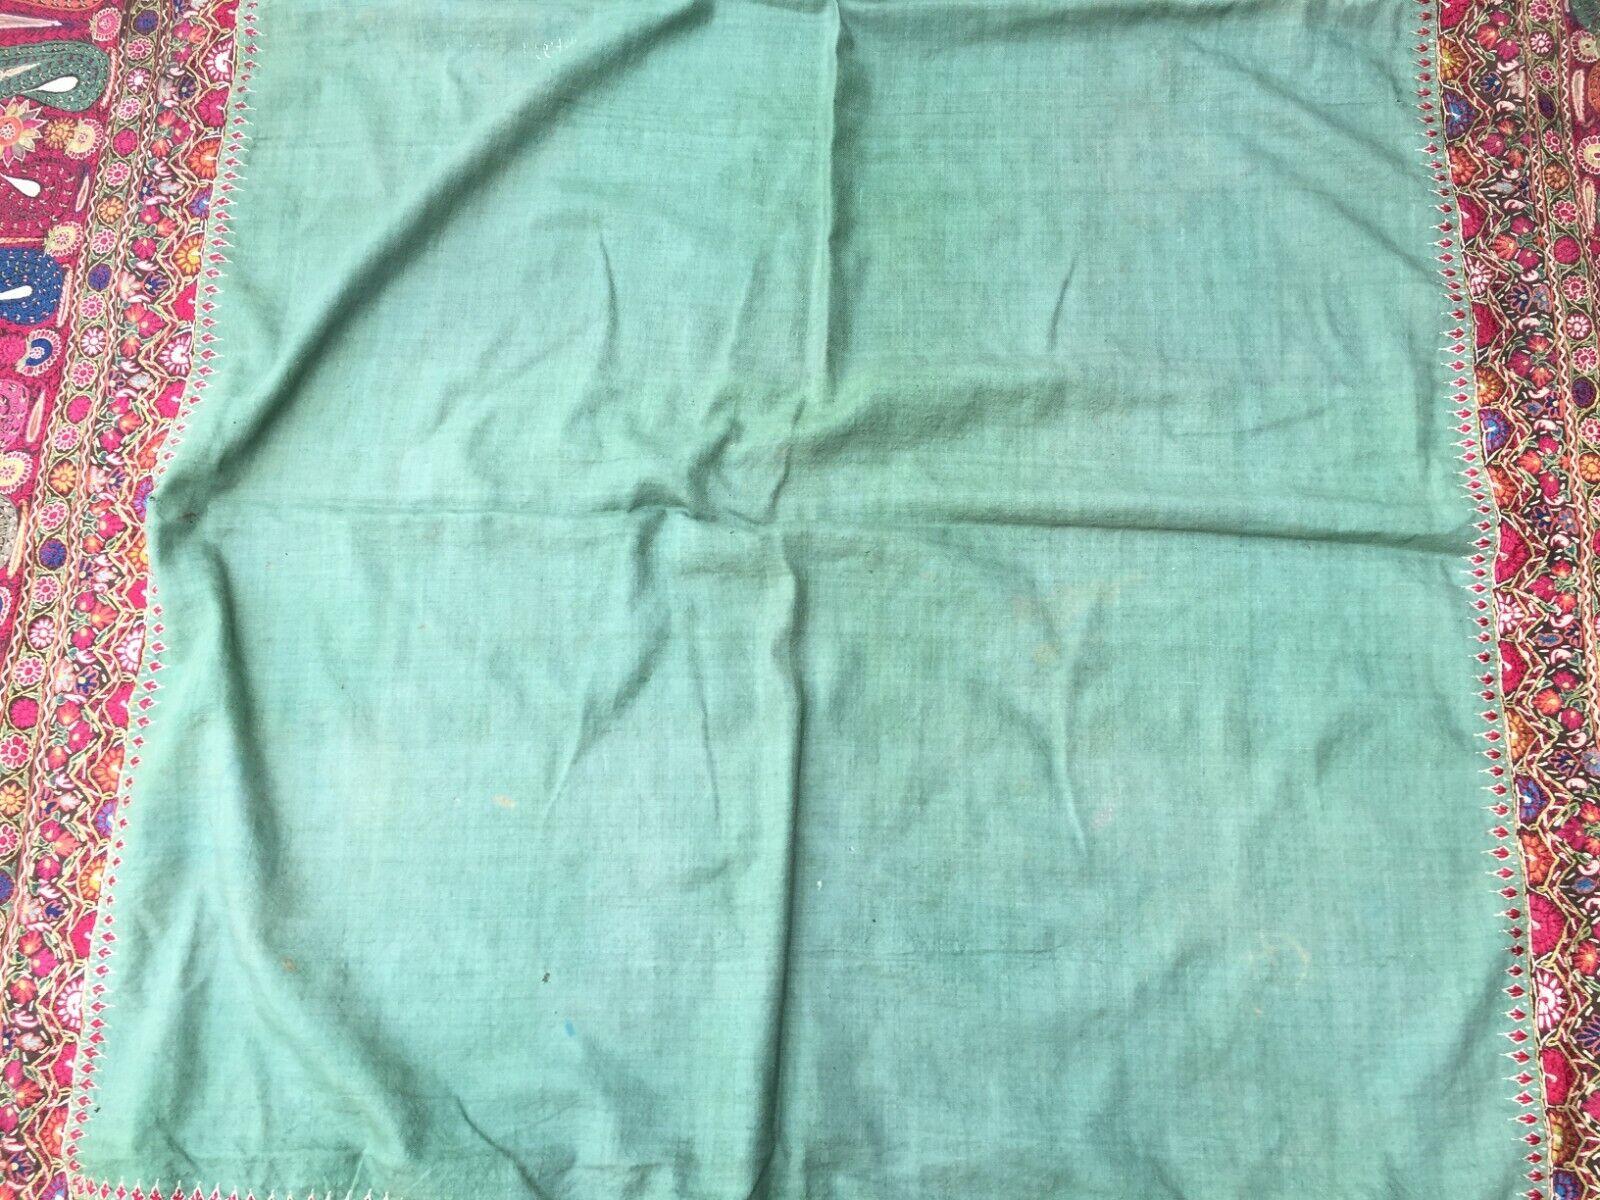 Handmade Antique Indian Kashmir Shawl:

Design and Colors:
This square-shaped shawl is a testament to Indian Kashmiri craftsmanship.
The dominant color is a rich green, creating a serene and earthy canvas.
The intricate border design steals the